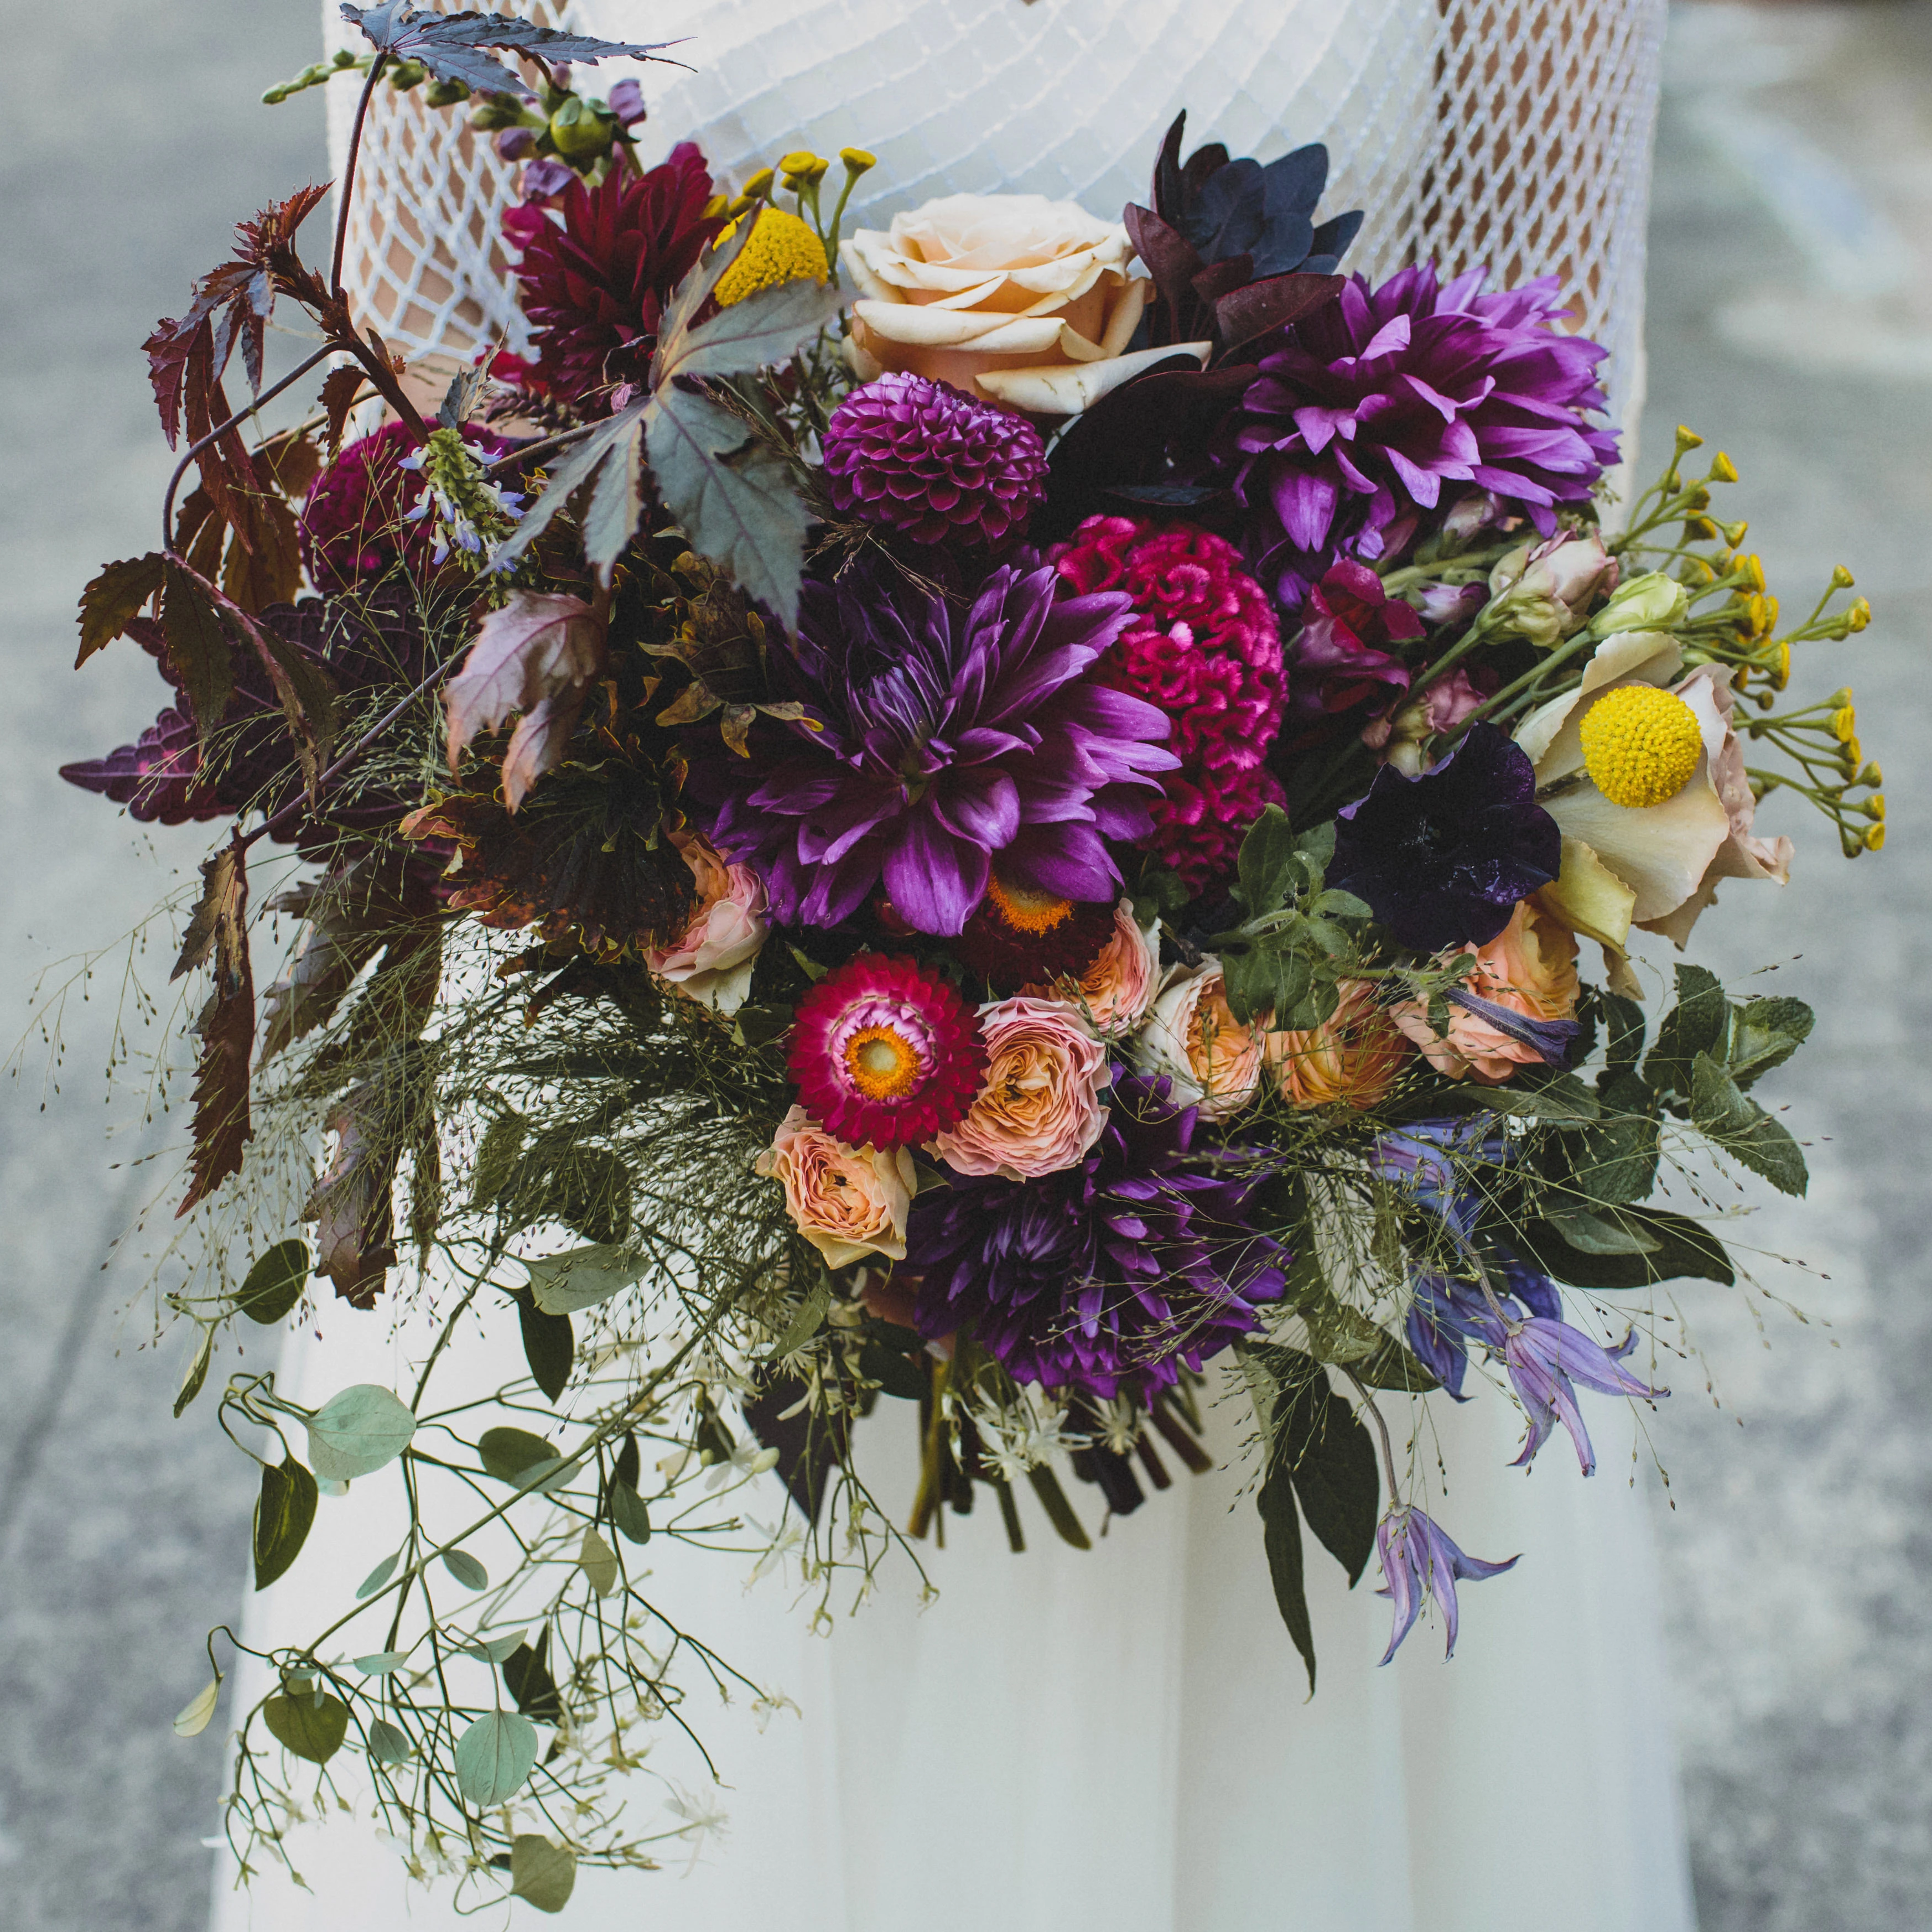 Person in white dress holding vibrant purple and orange bouquet with deep green foliage